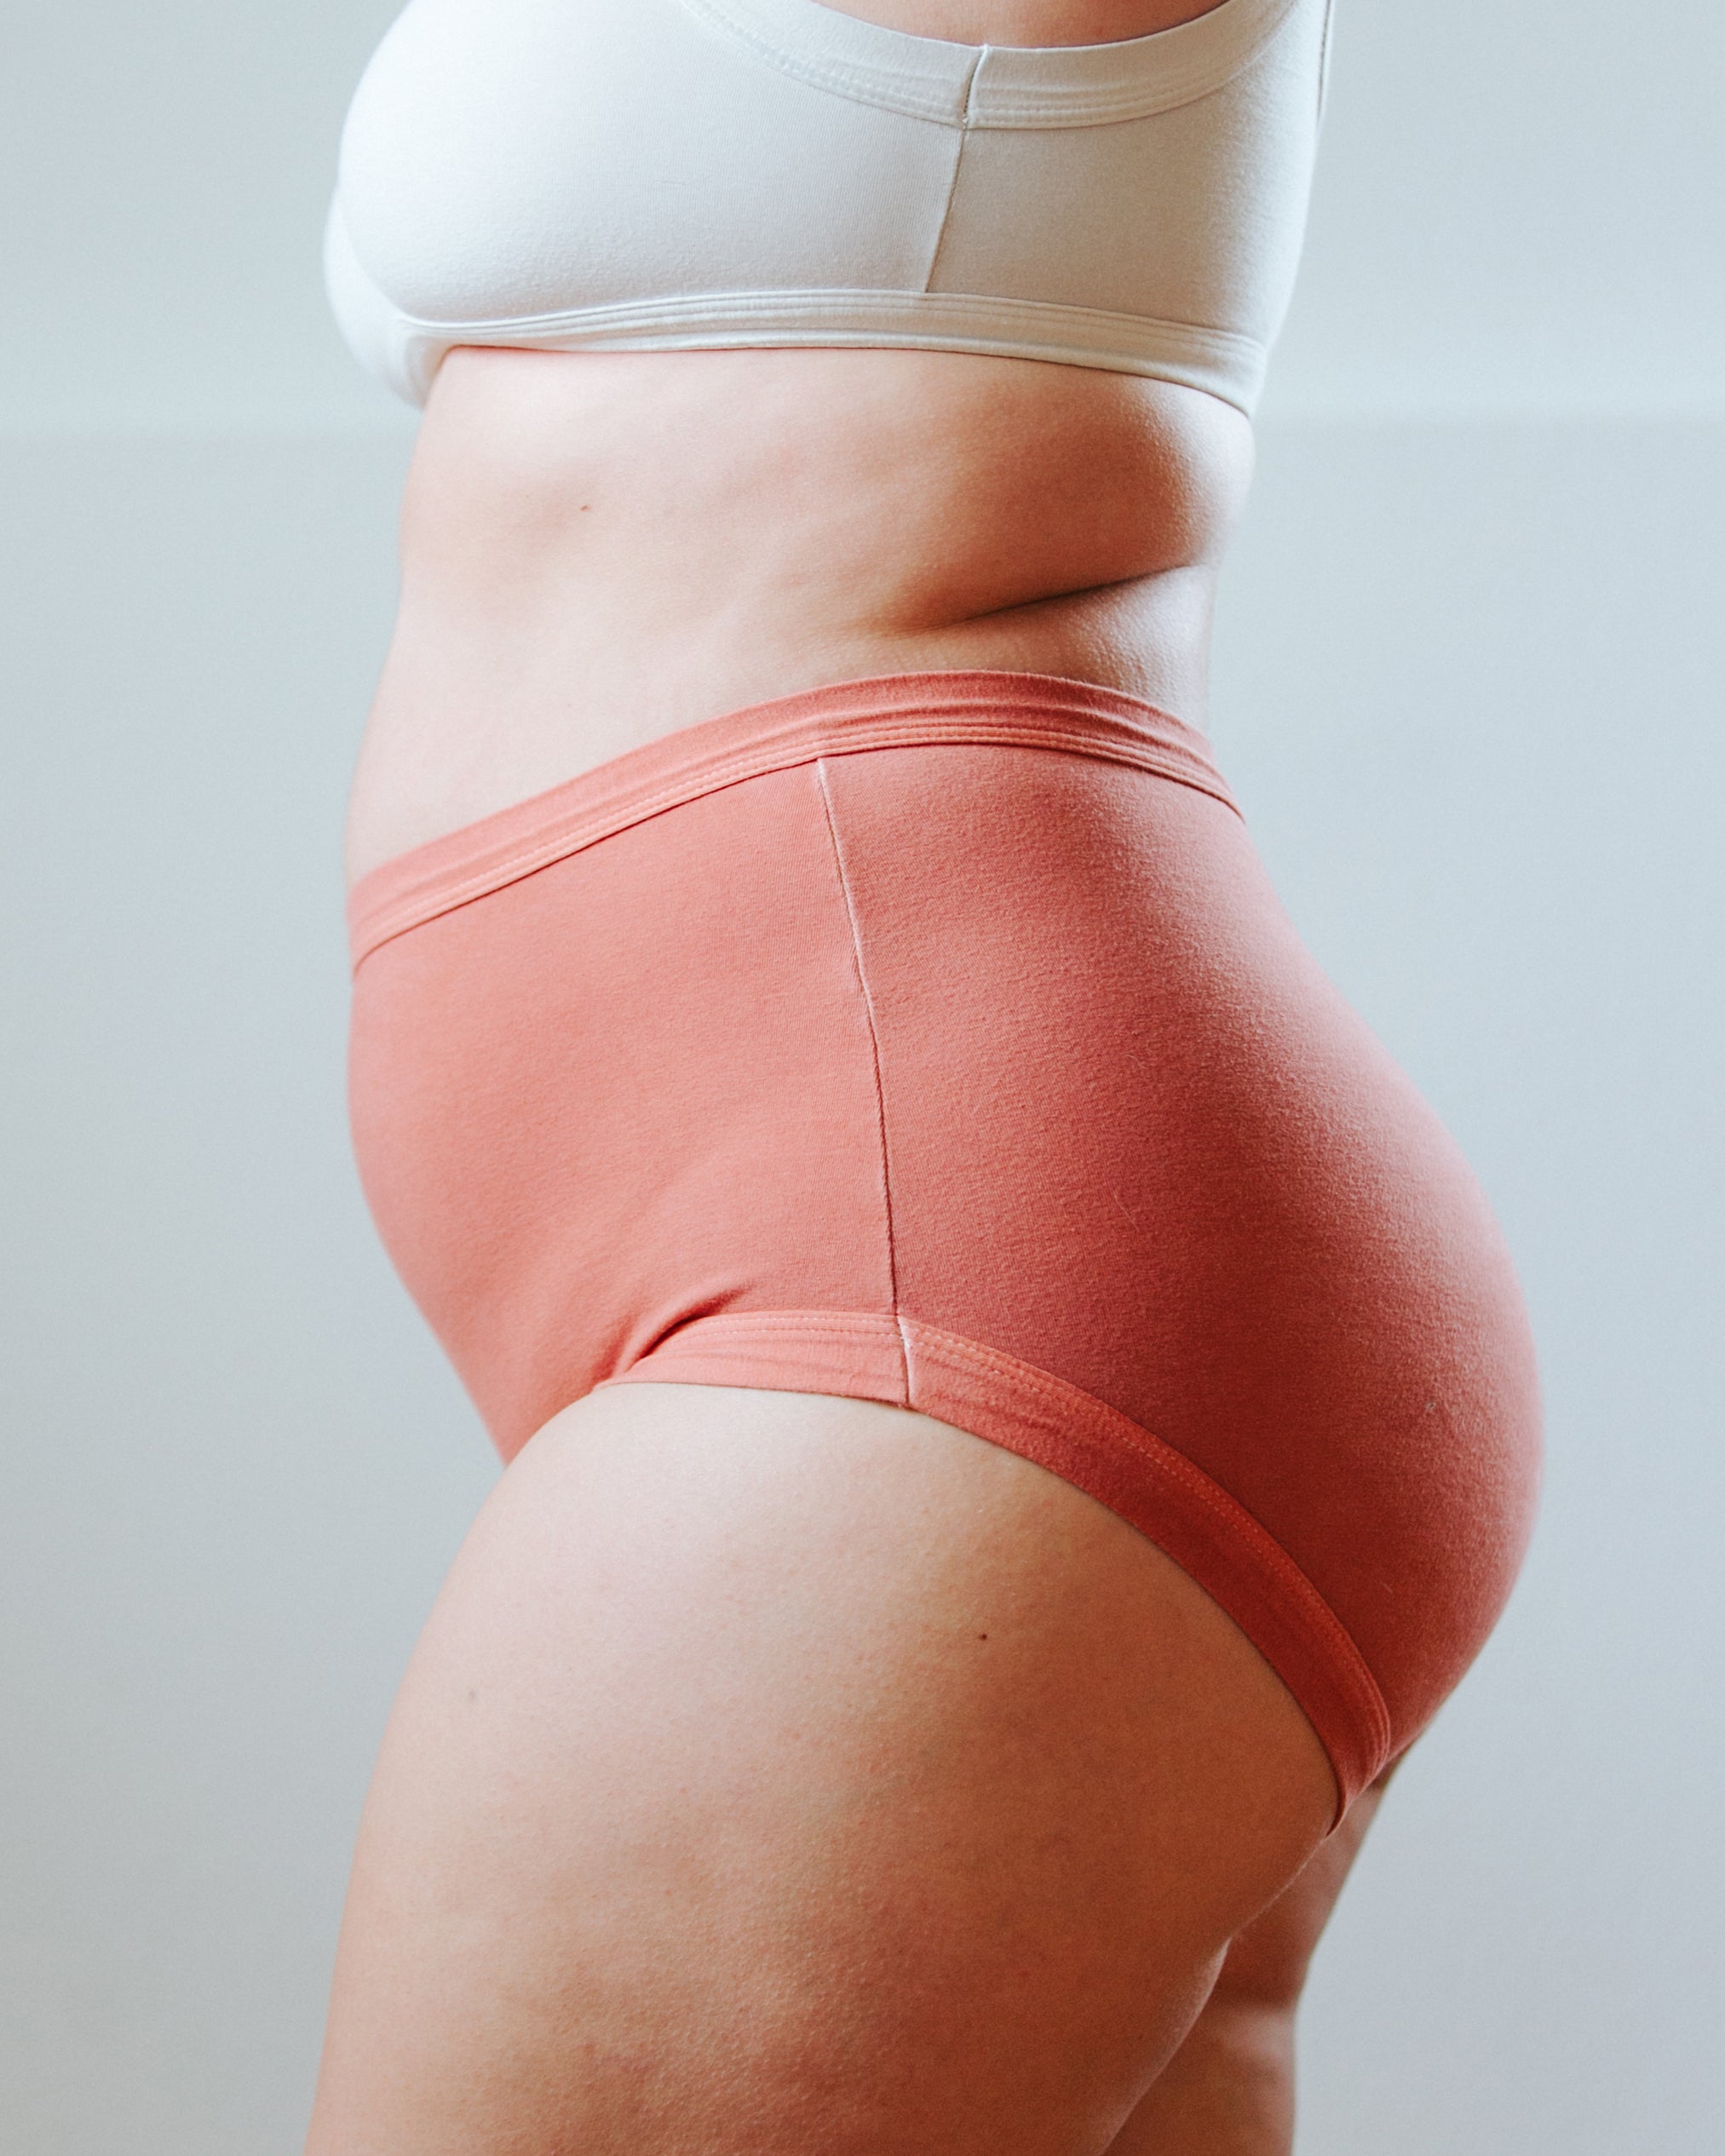 Side photo showing Thunderpants Organic Cotton original style underwear in hand dyed Terracotta color on a model.